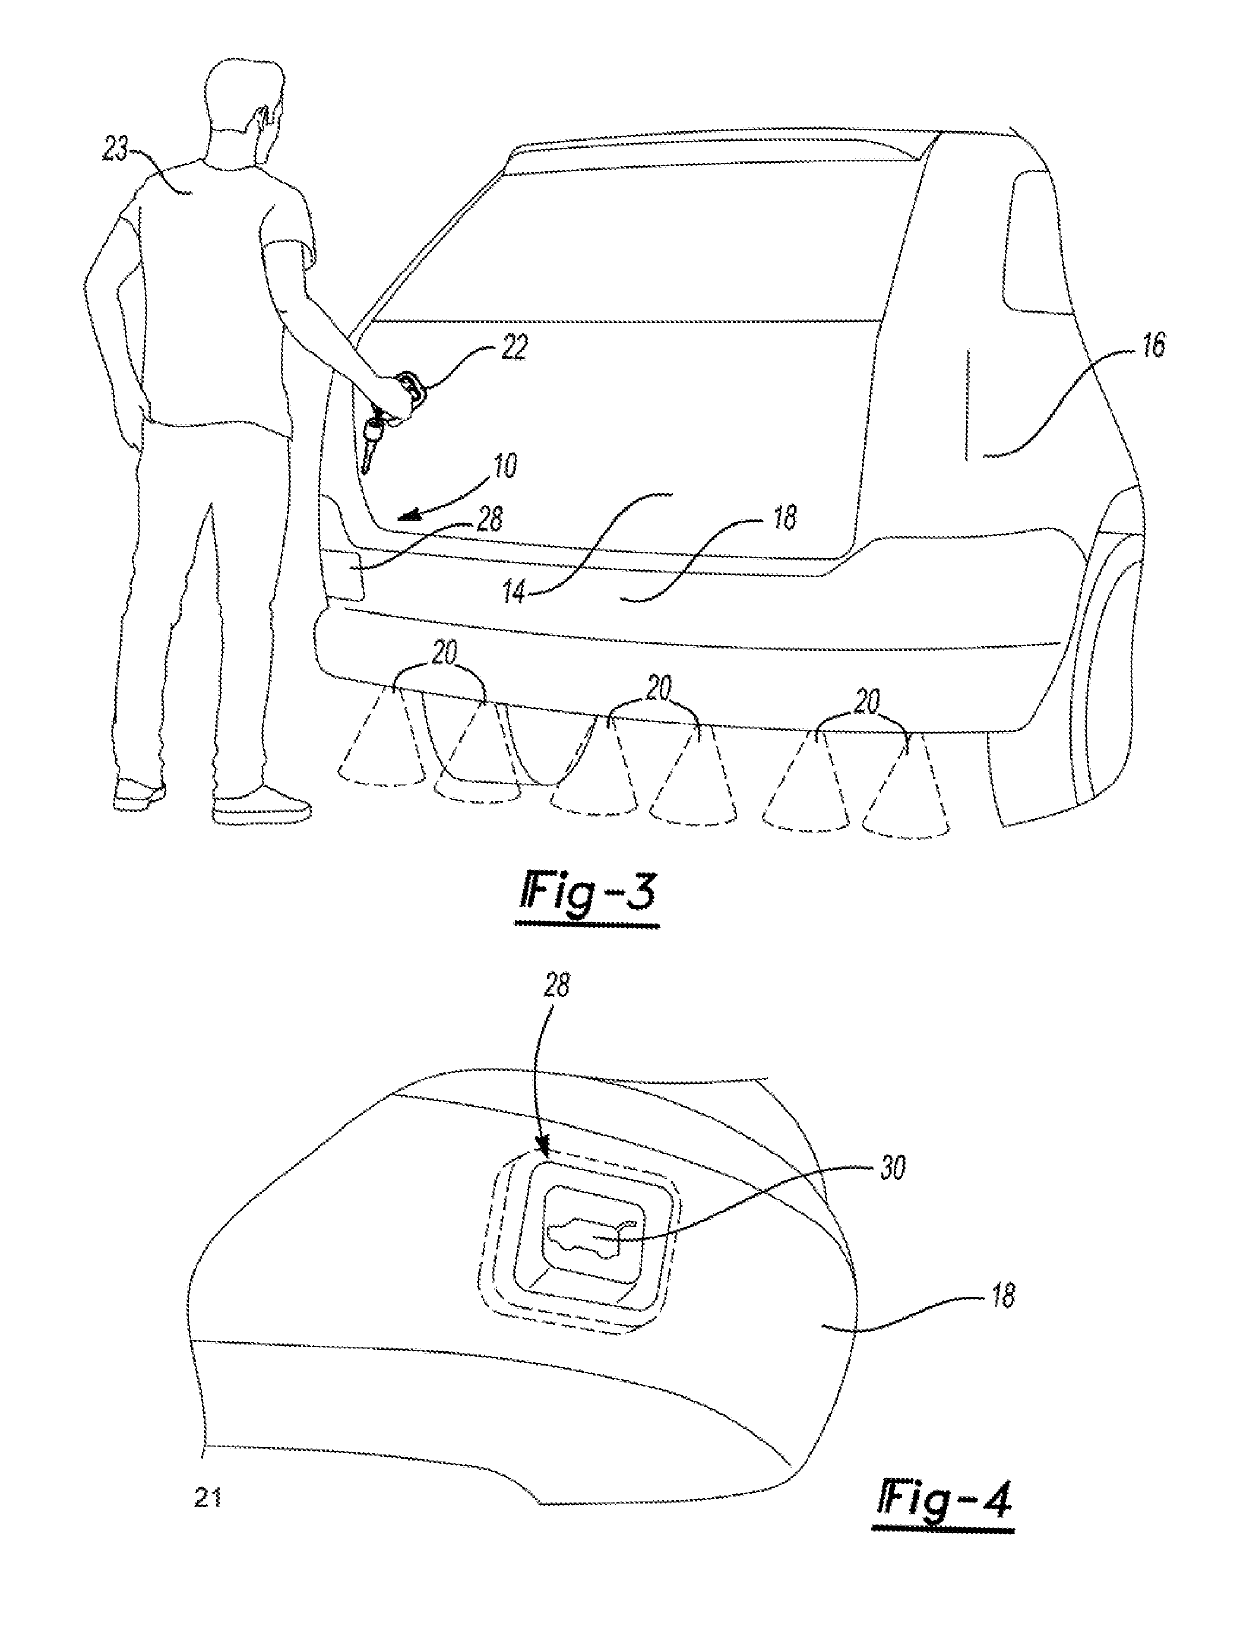 Ultrasonic object detection system for motor vehicles and method of operation thereof